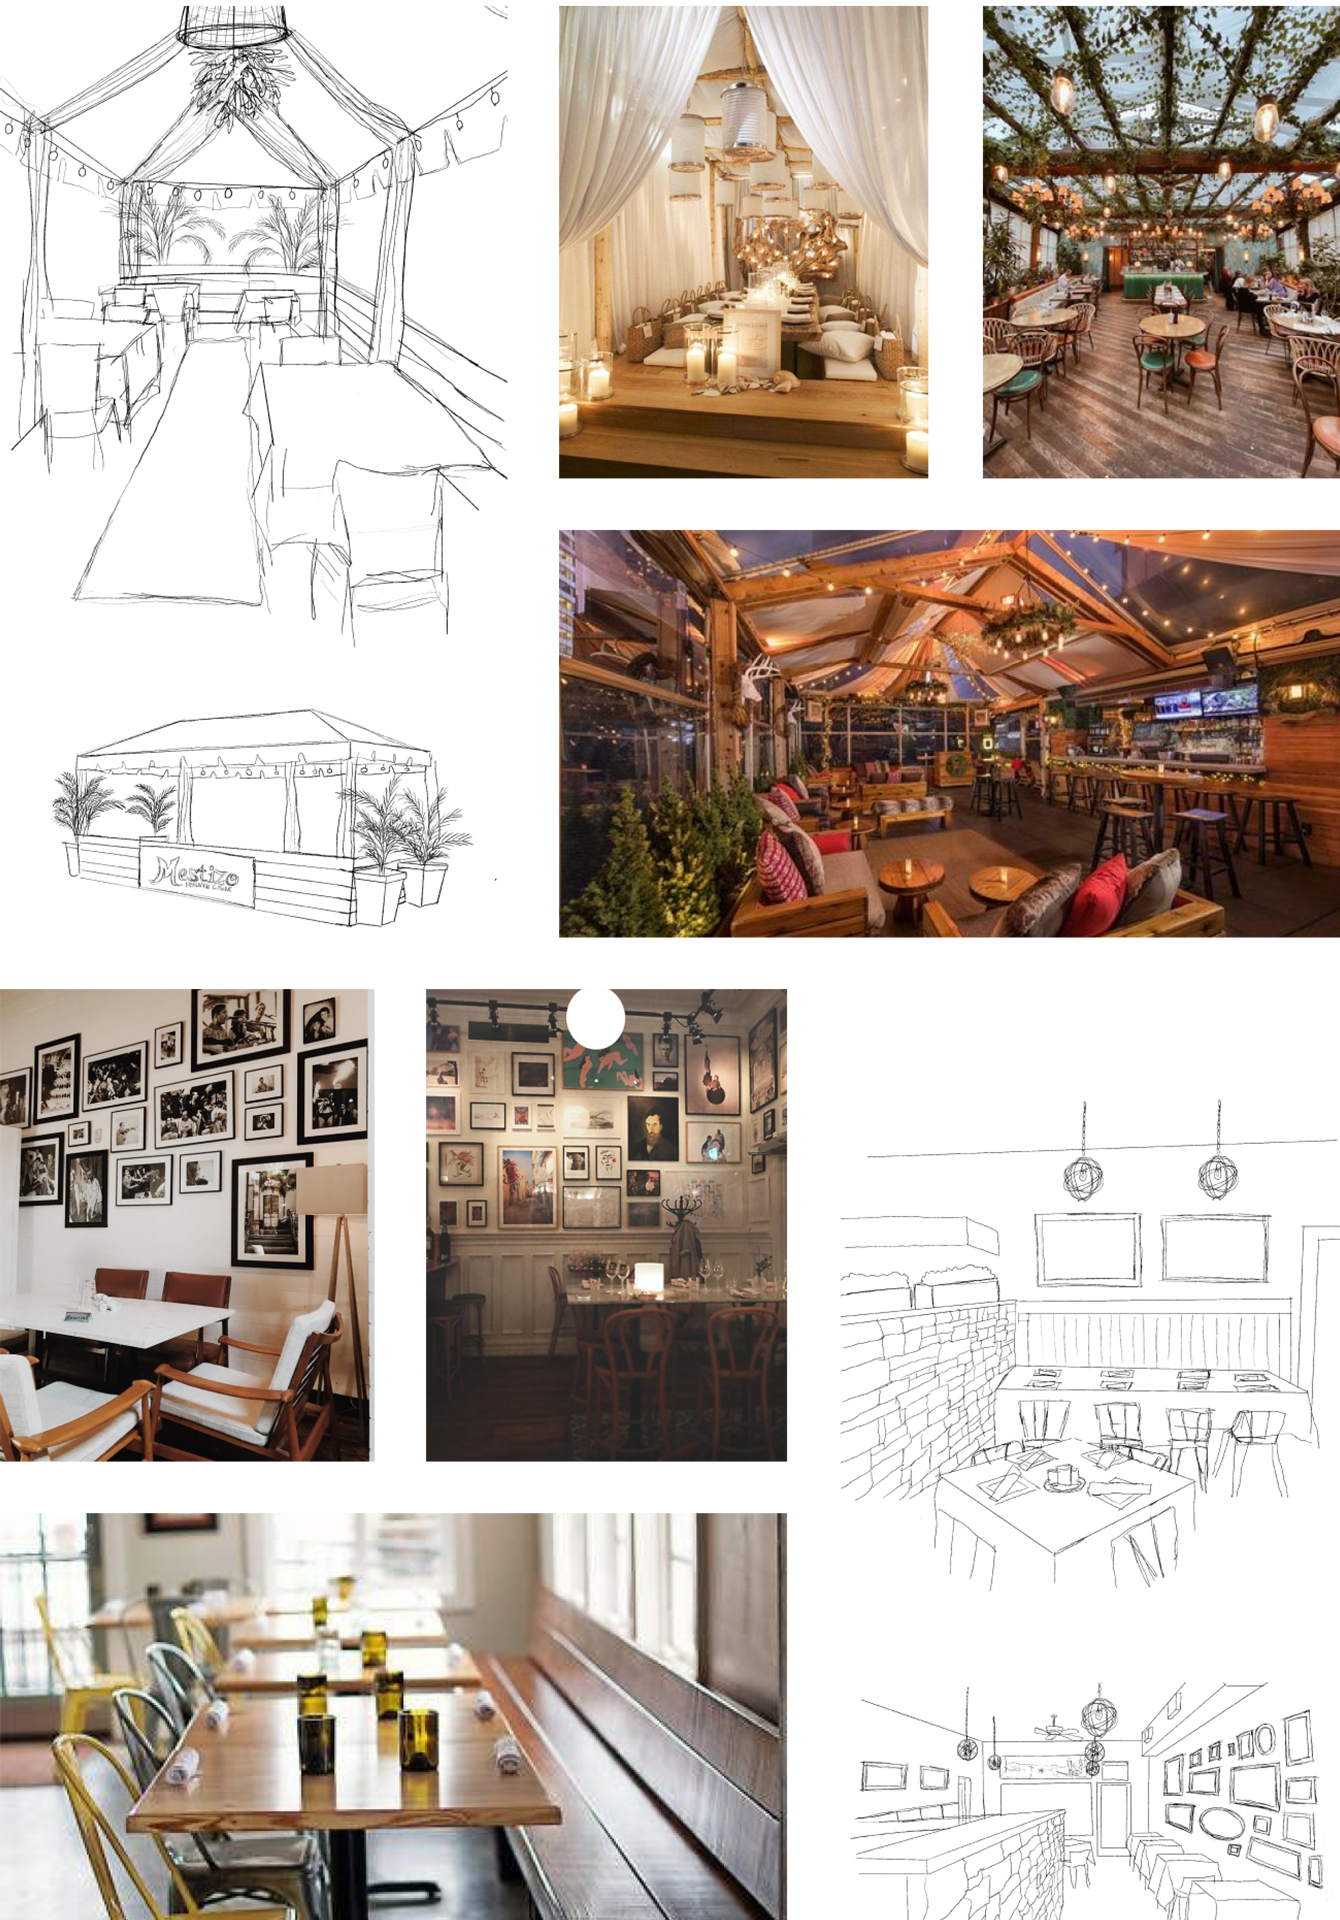 Rough concept sketches & inspiration mood board for Mesitizo Peruvian Cuisine patio tent & restaurant interior, showing off siding, plants, lighting & curtain additions, gallery wall references, & seating options to create a more inviting atmosphere.